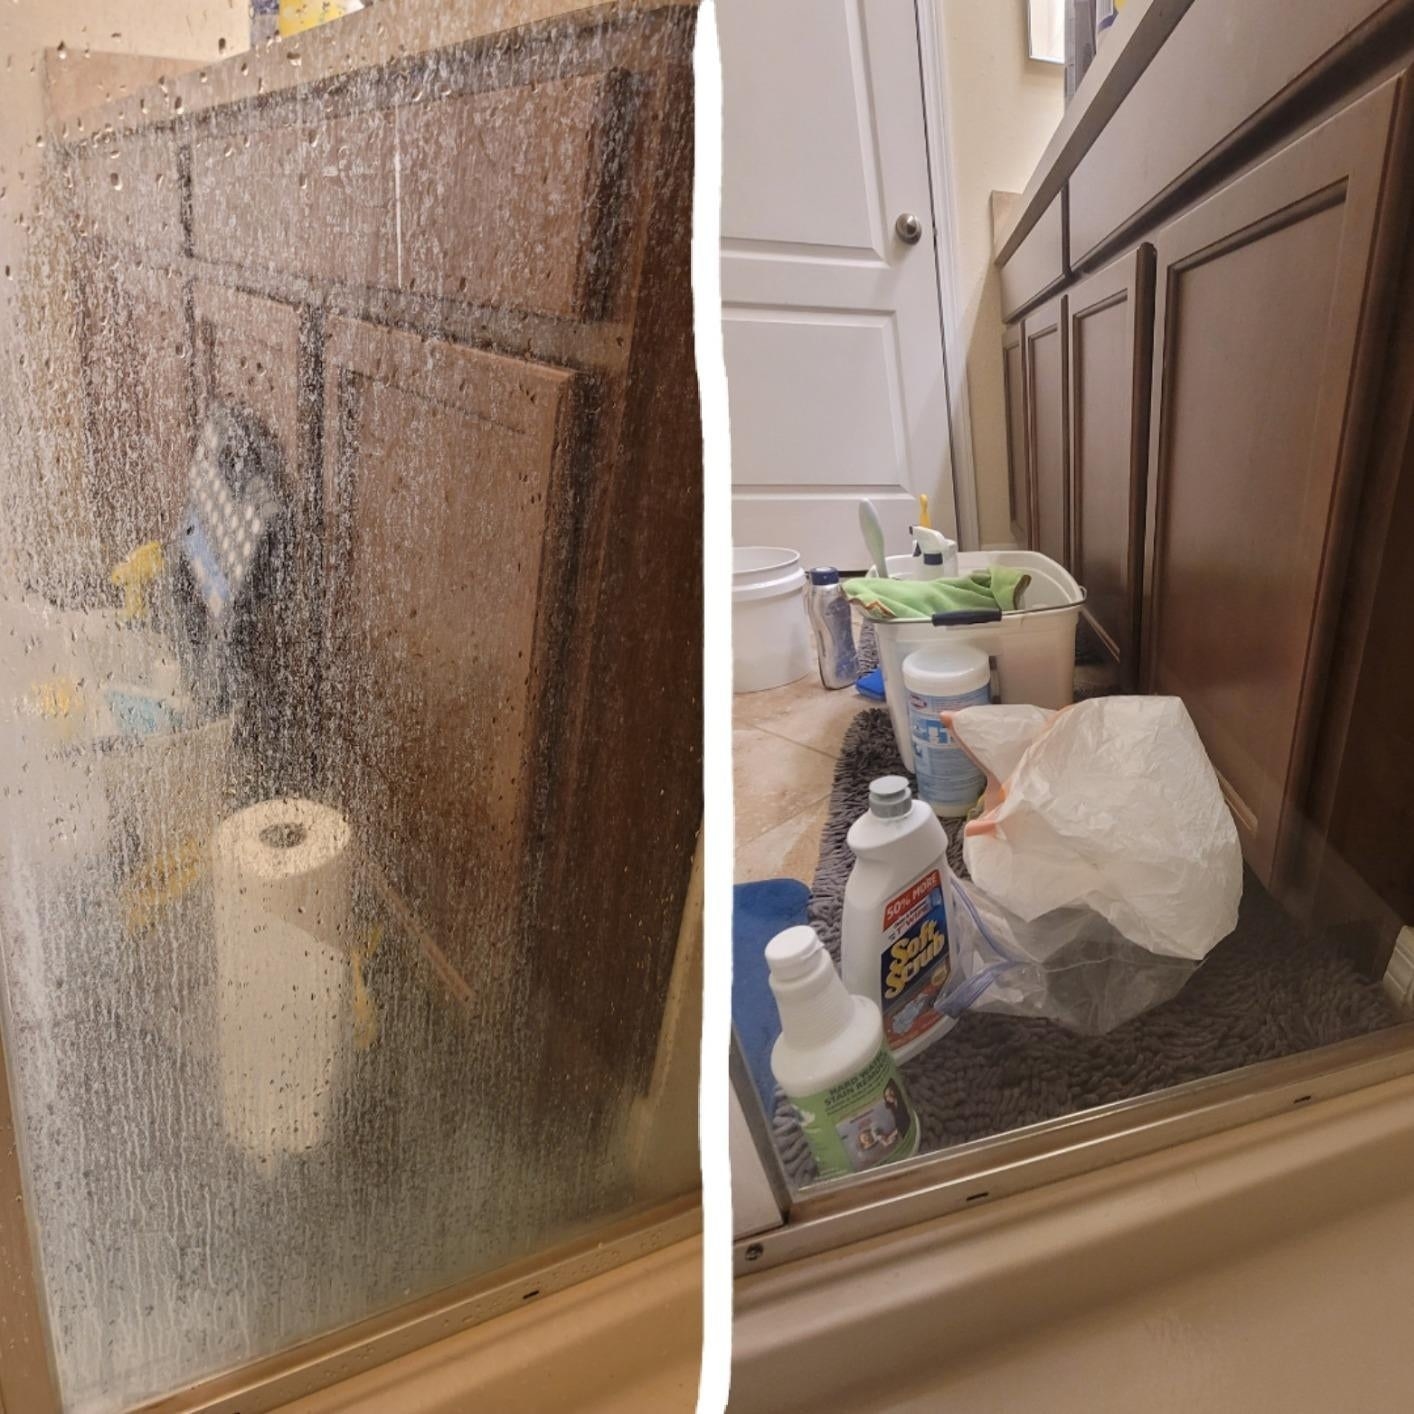 on left, water-stained clear shower door. on right, clear shower door after using the cleaner above